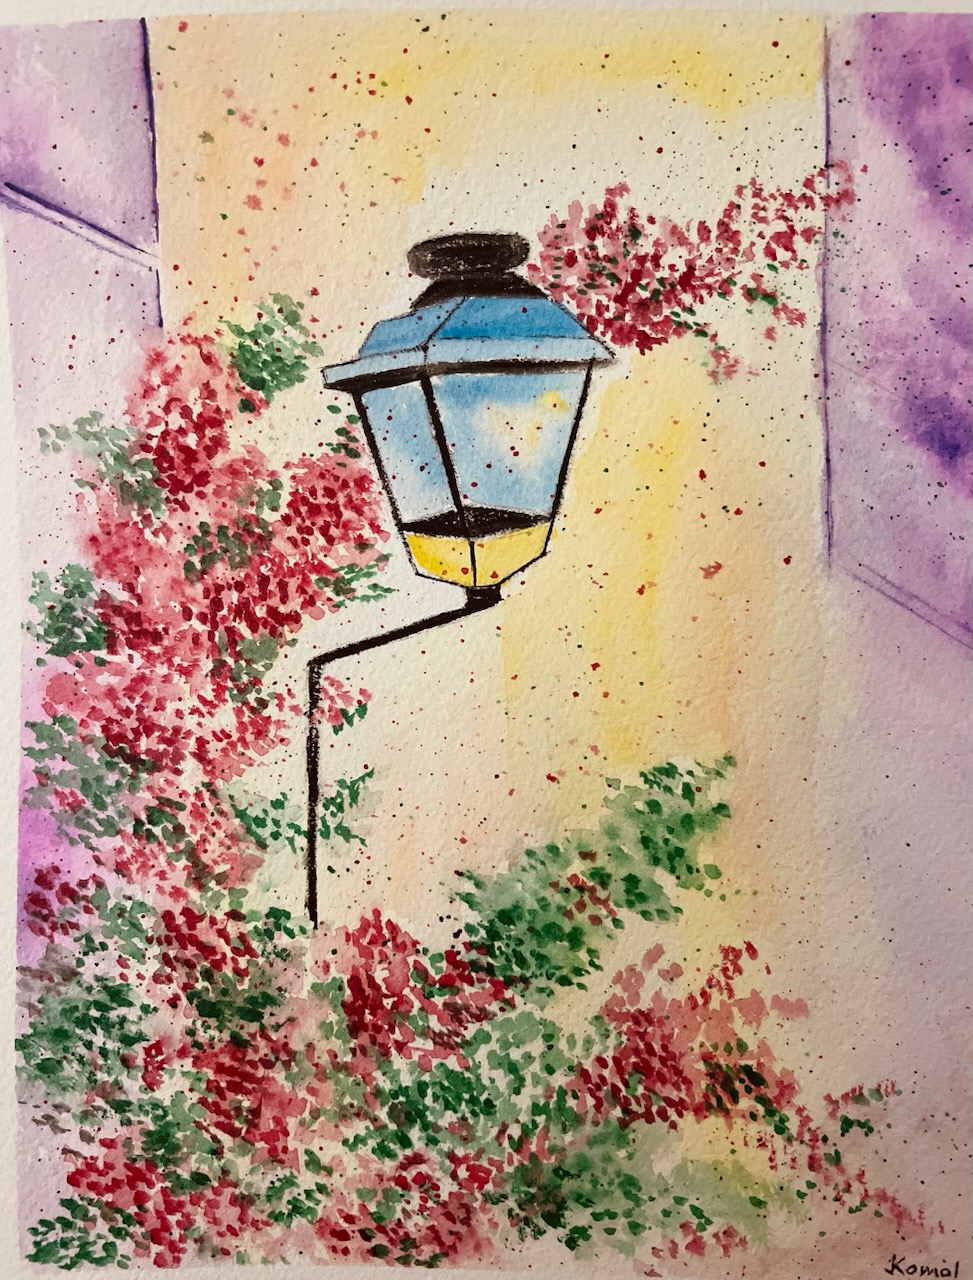 WATERCOLOR for BEGINNERS (Adult Only) - The Art Hut